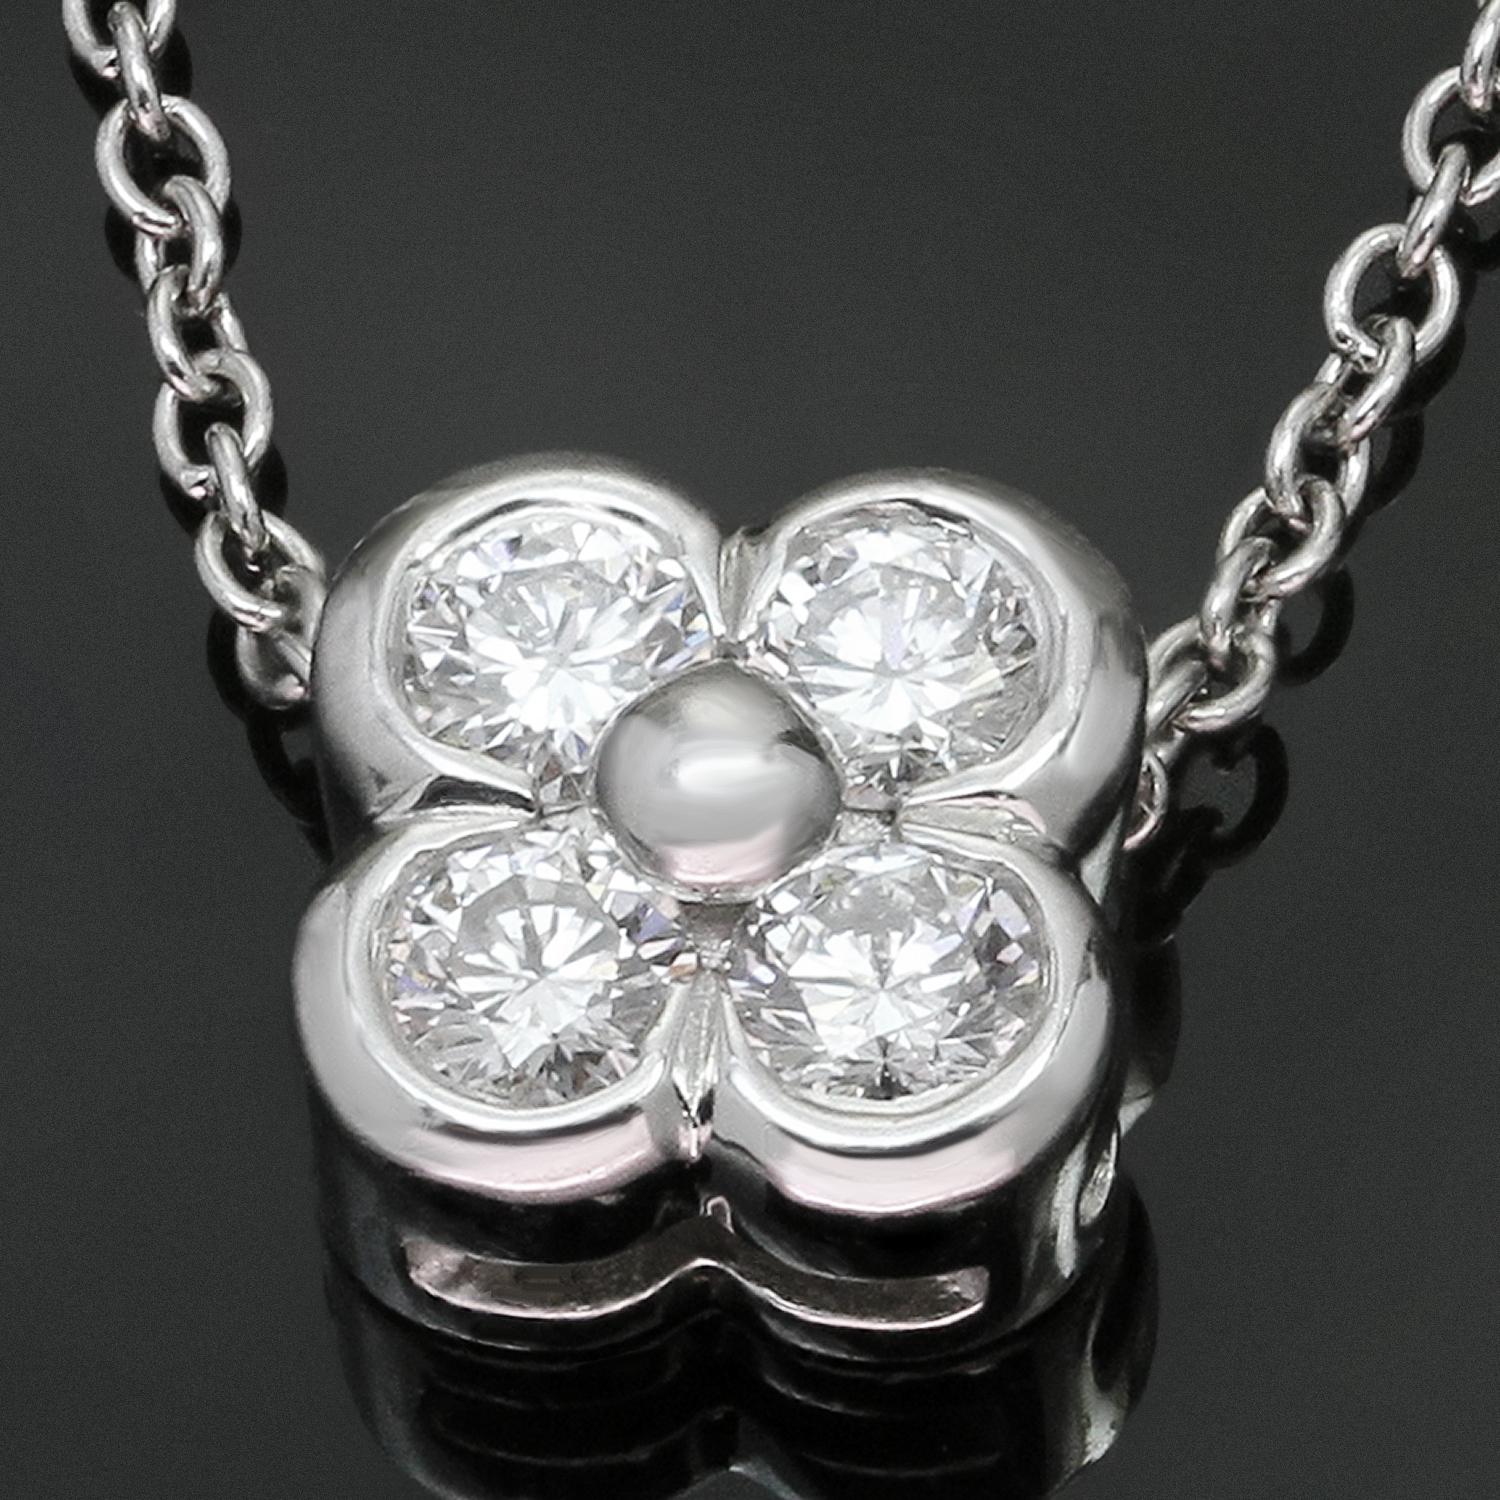 This classic and timeless Tiffany & Co. necklace crafted in platinum and features a flower-shaped pendant bezel-set with brilliant-cut round F-G VVS1-VVS2 diamonds of an estimated 0.24 carats. Made in United States circa 2000s. Measurements: 0.31